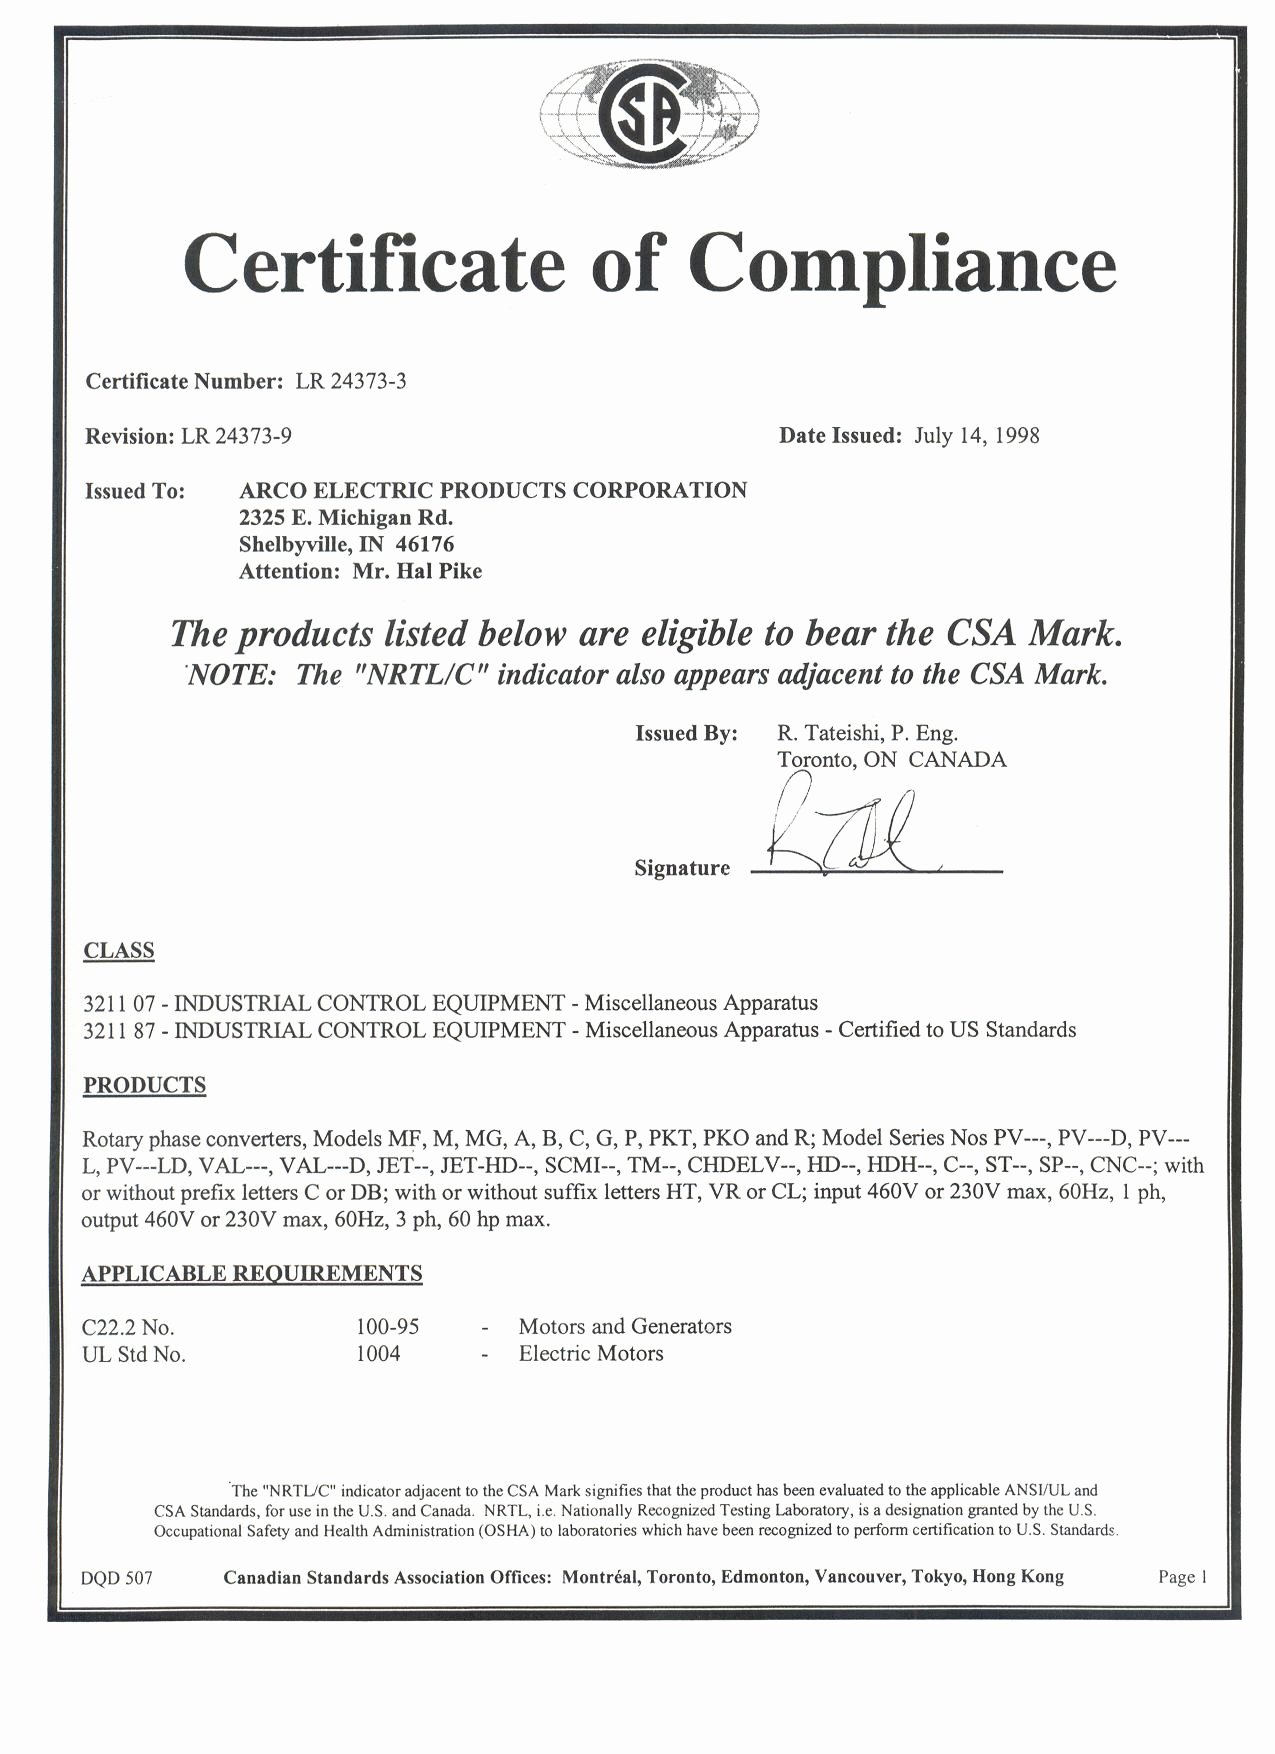 Certificate Of Compliance Template Luxury Certificate Pliance form Related Keywords